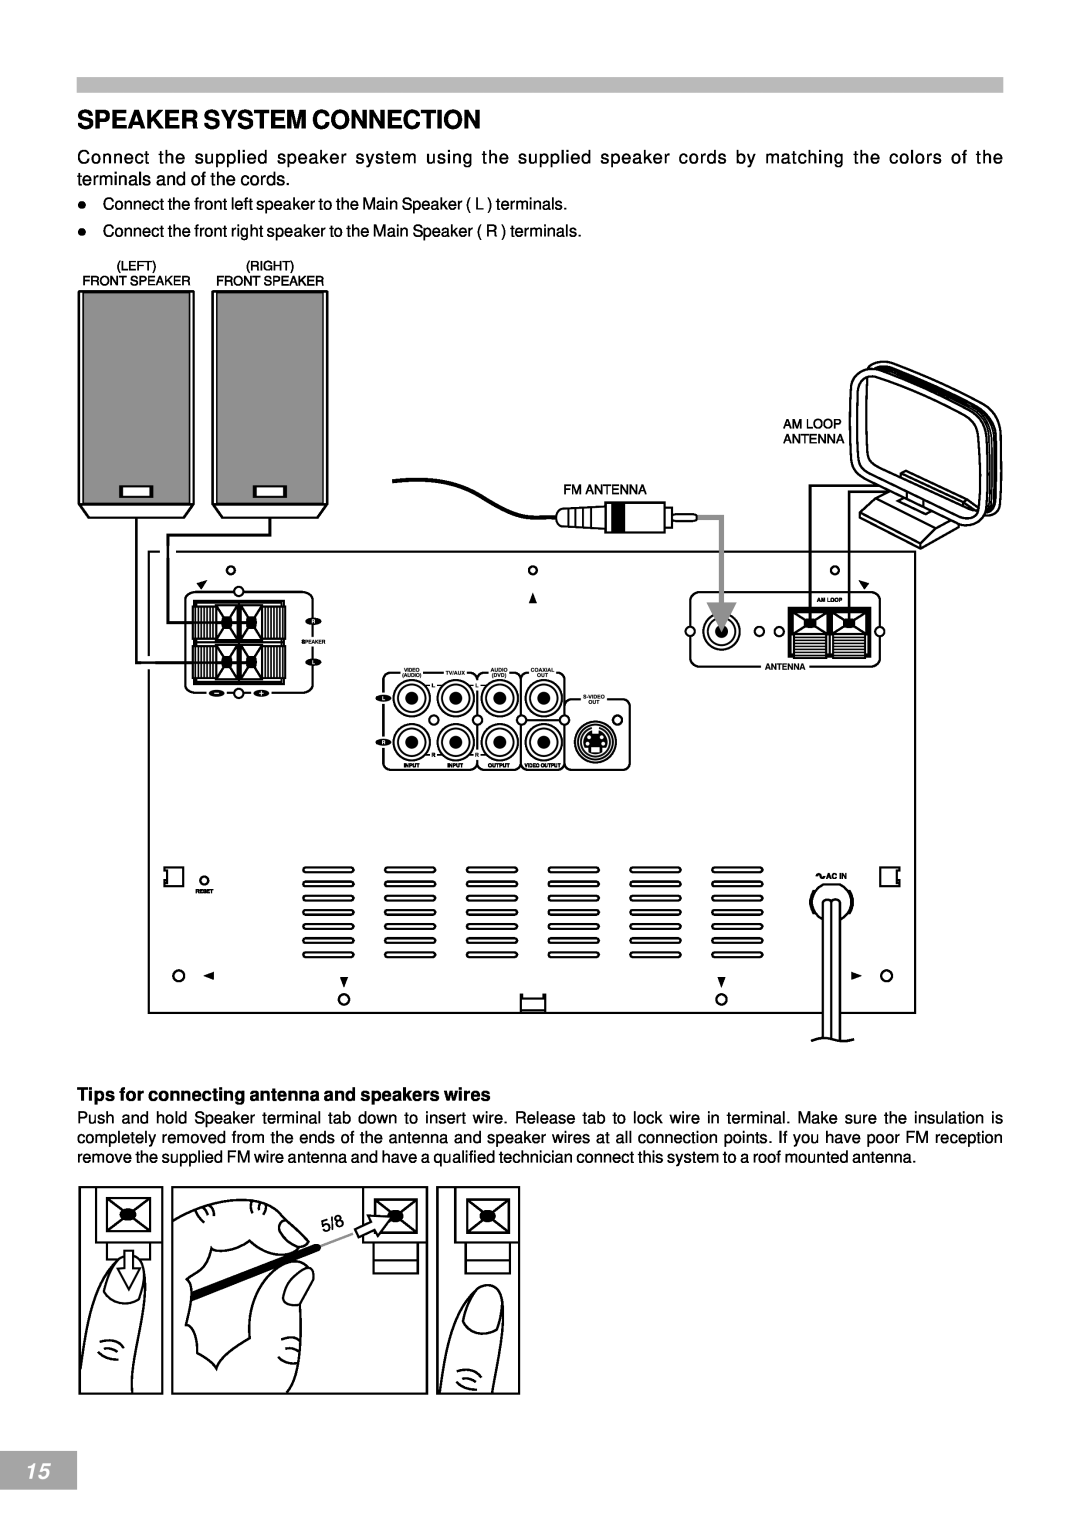 Emerson AV50 owner manual Speaker System Connection, Tips for connecting antenna and speakers wires 